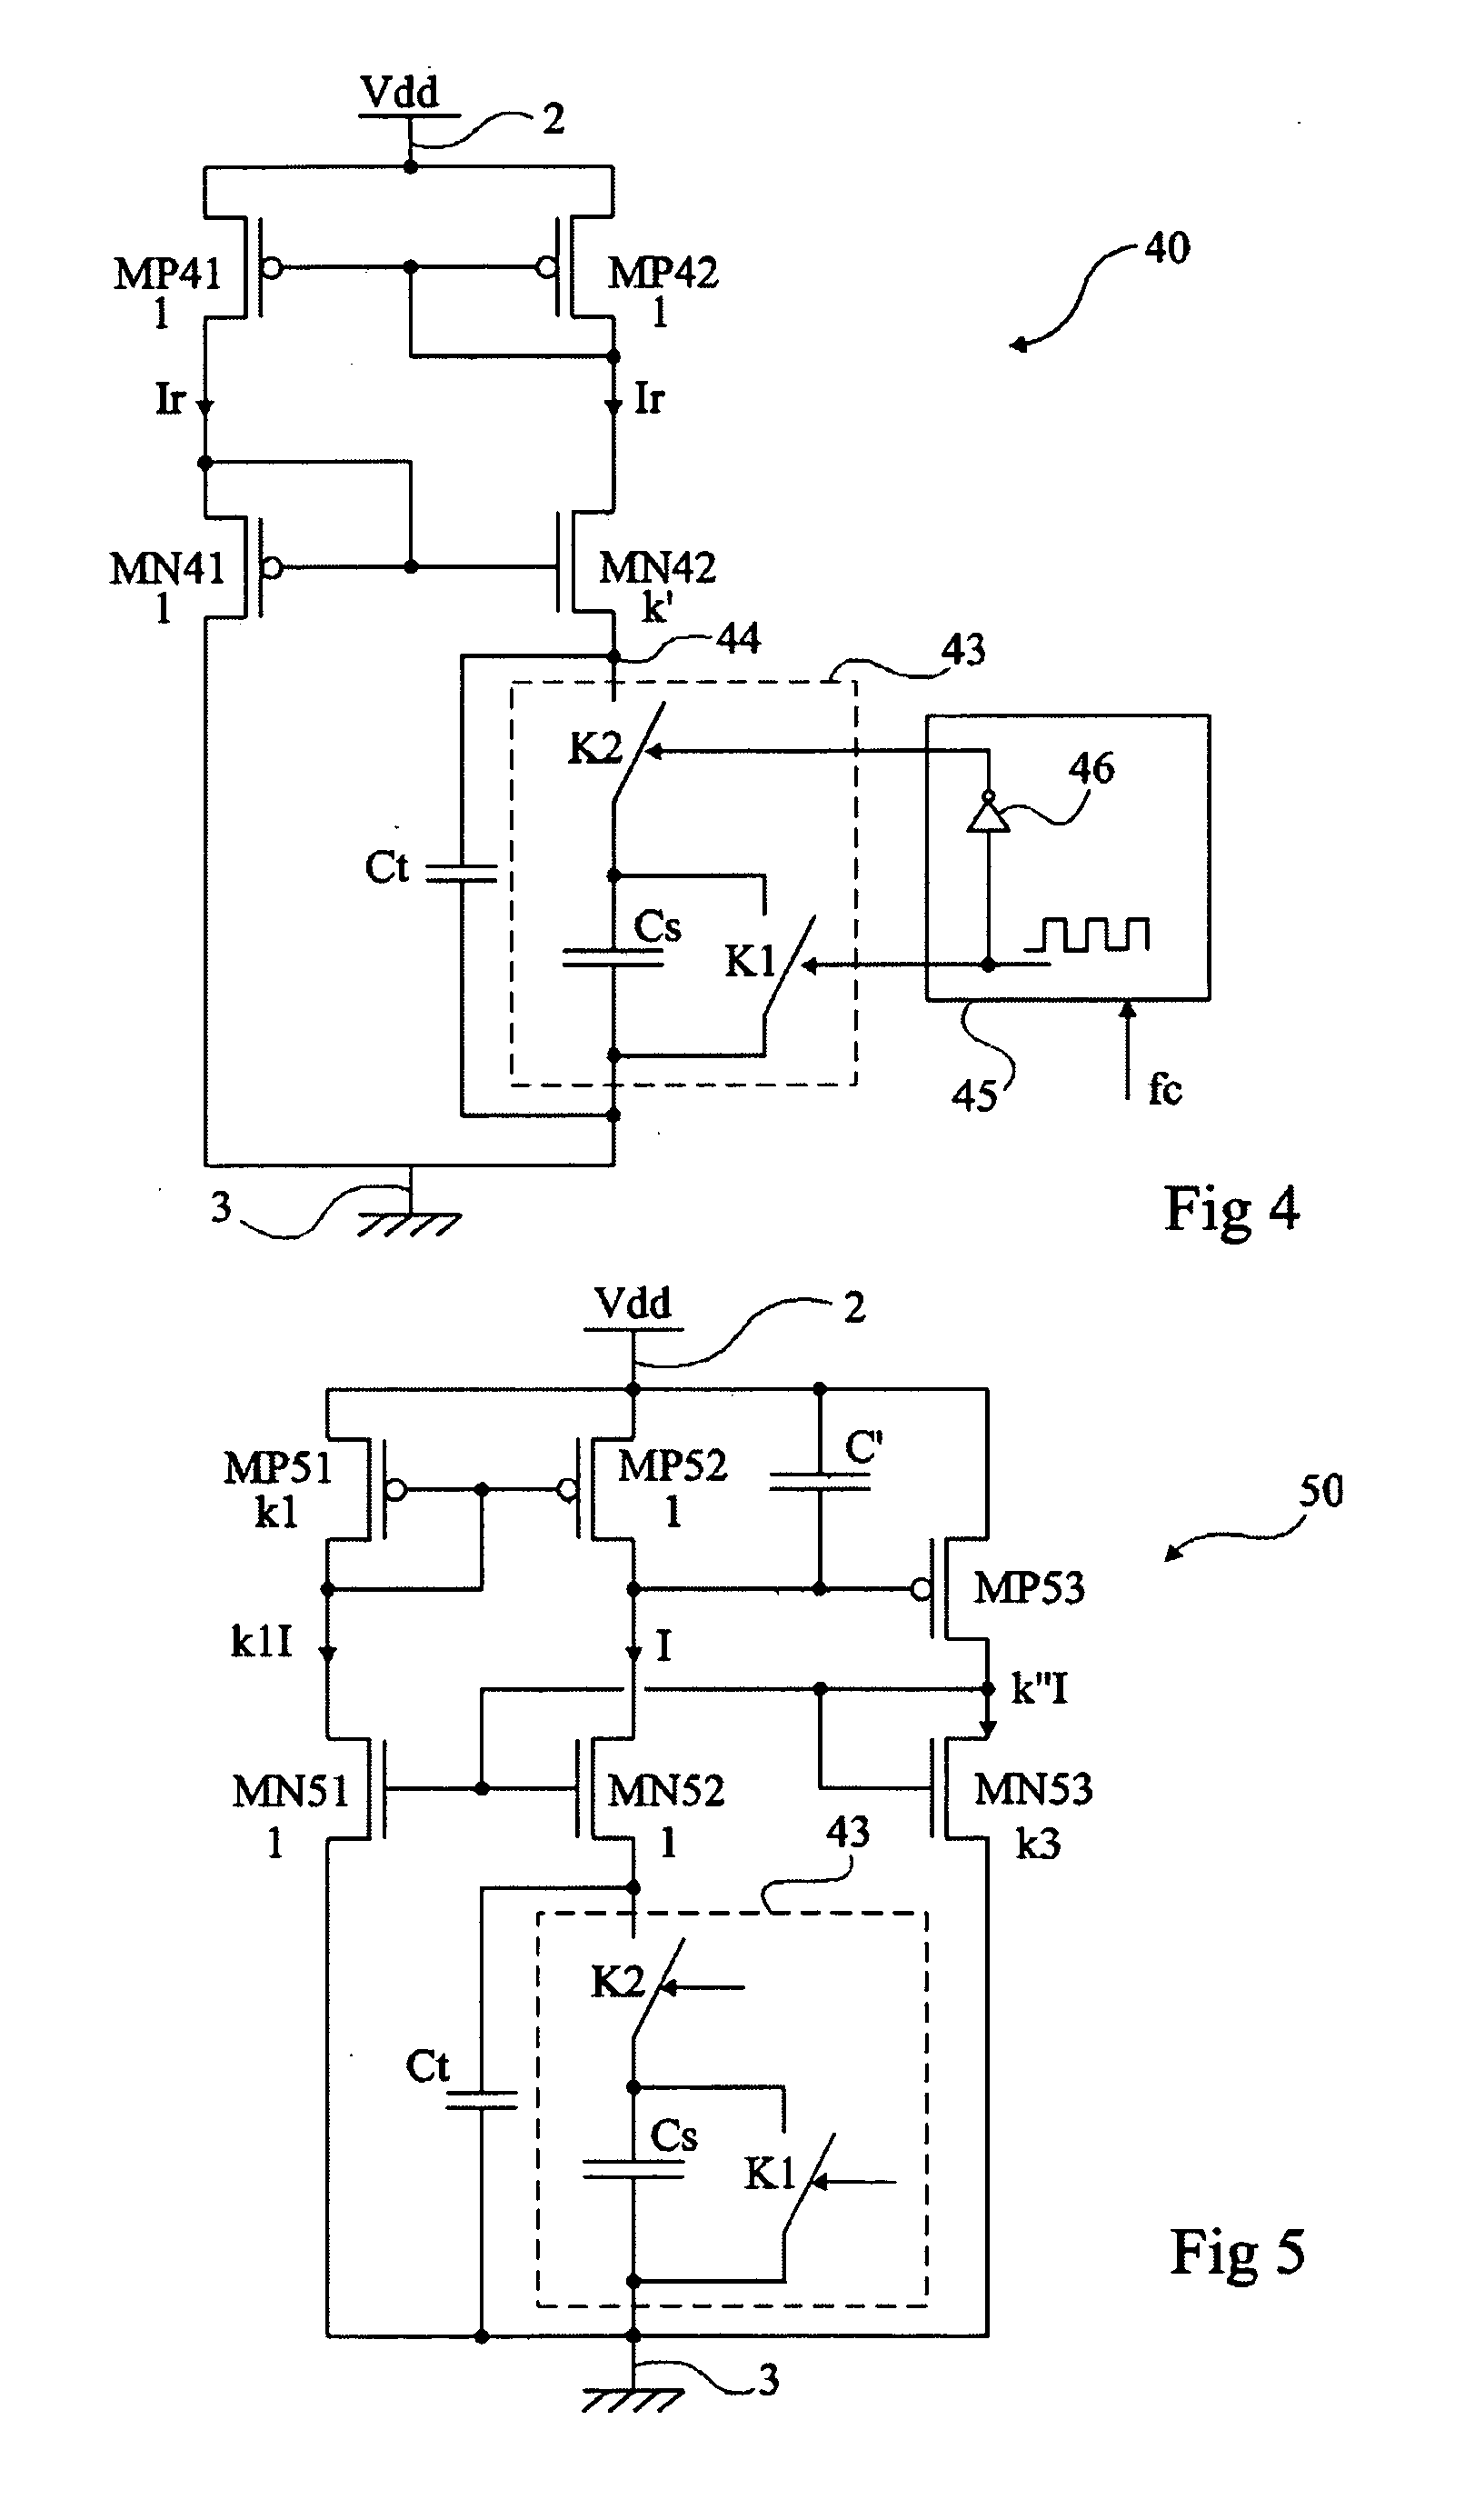 Circuit for generating a reference current